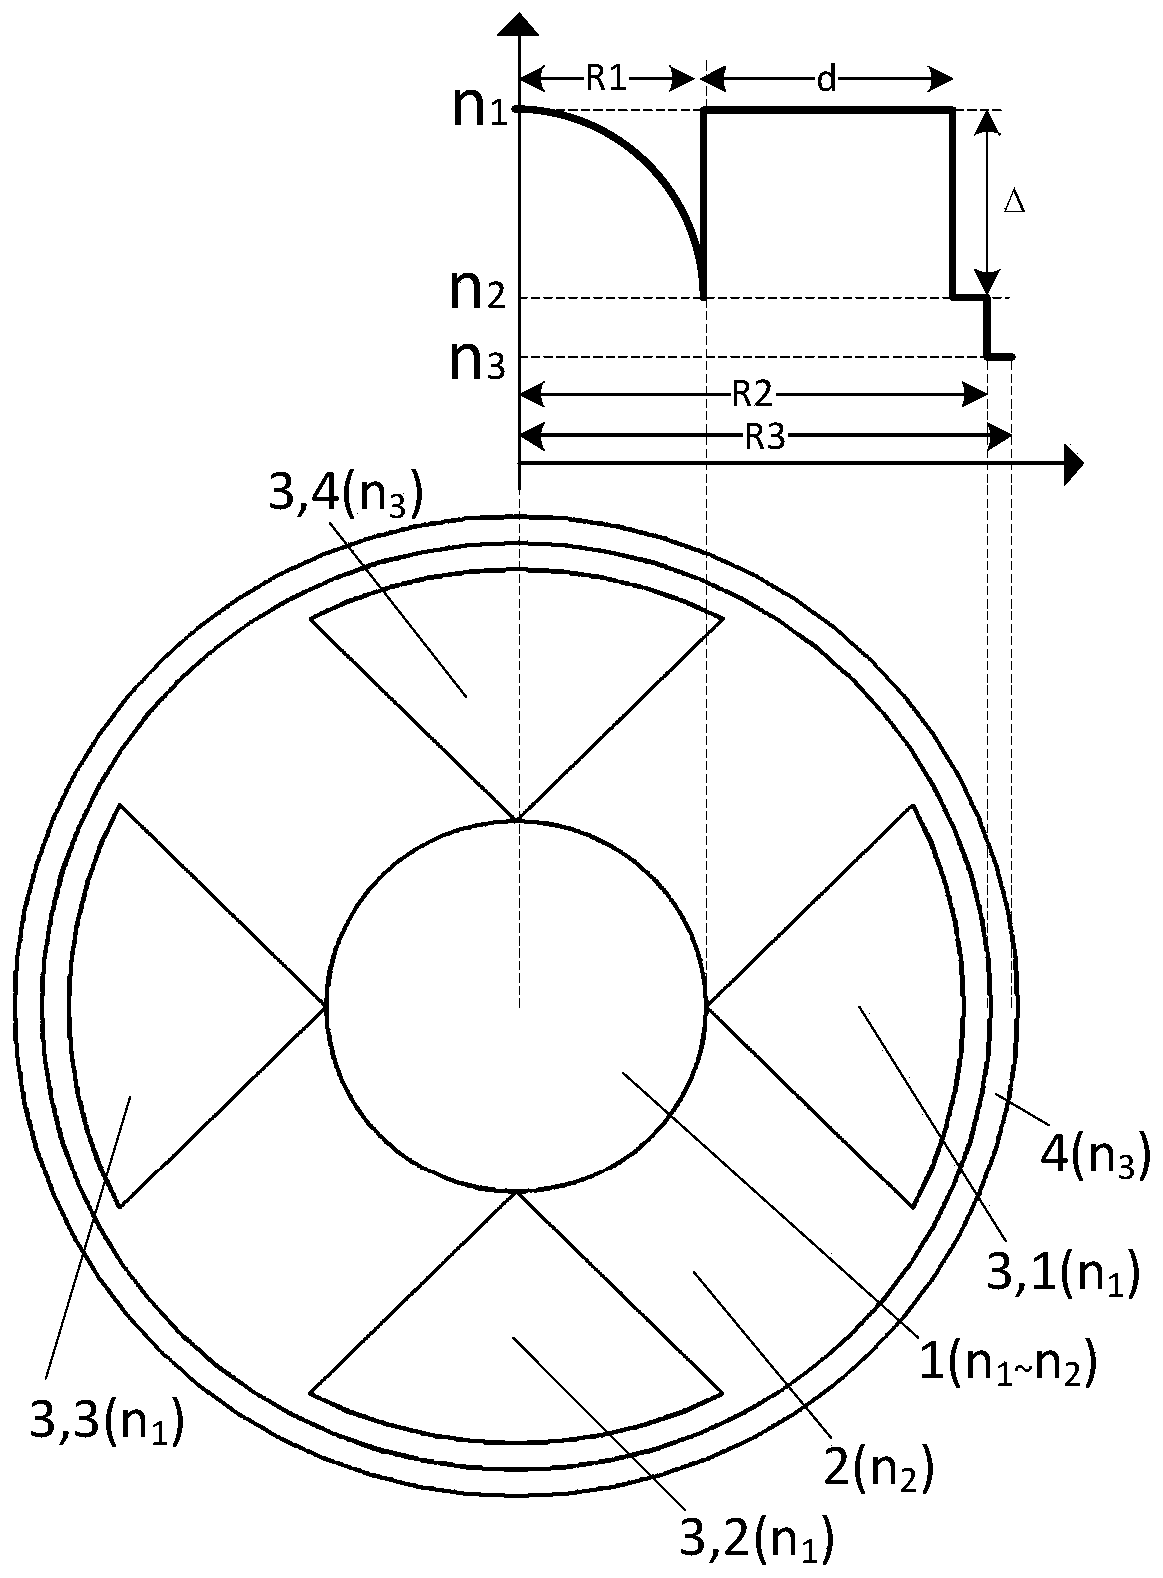 A large-mode-field bending-resistant single-mode fiber with parabolic cores coupled with lobe-shaped cores